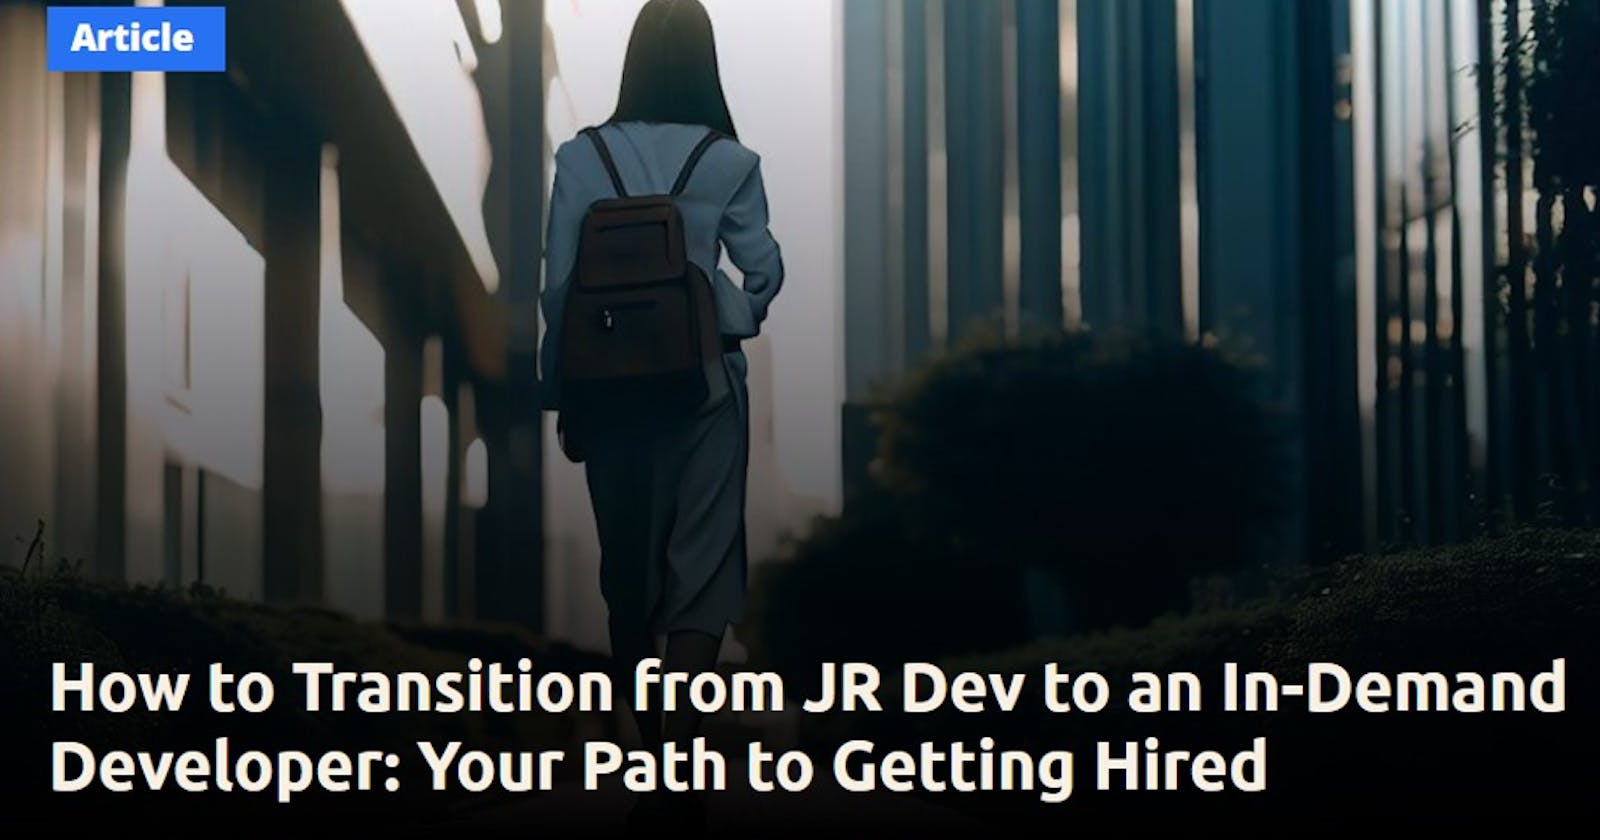 How to Transition from JR Dev to an In-Demand Developer: Your Path to Getting Hired